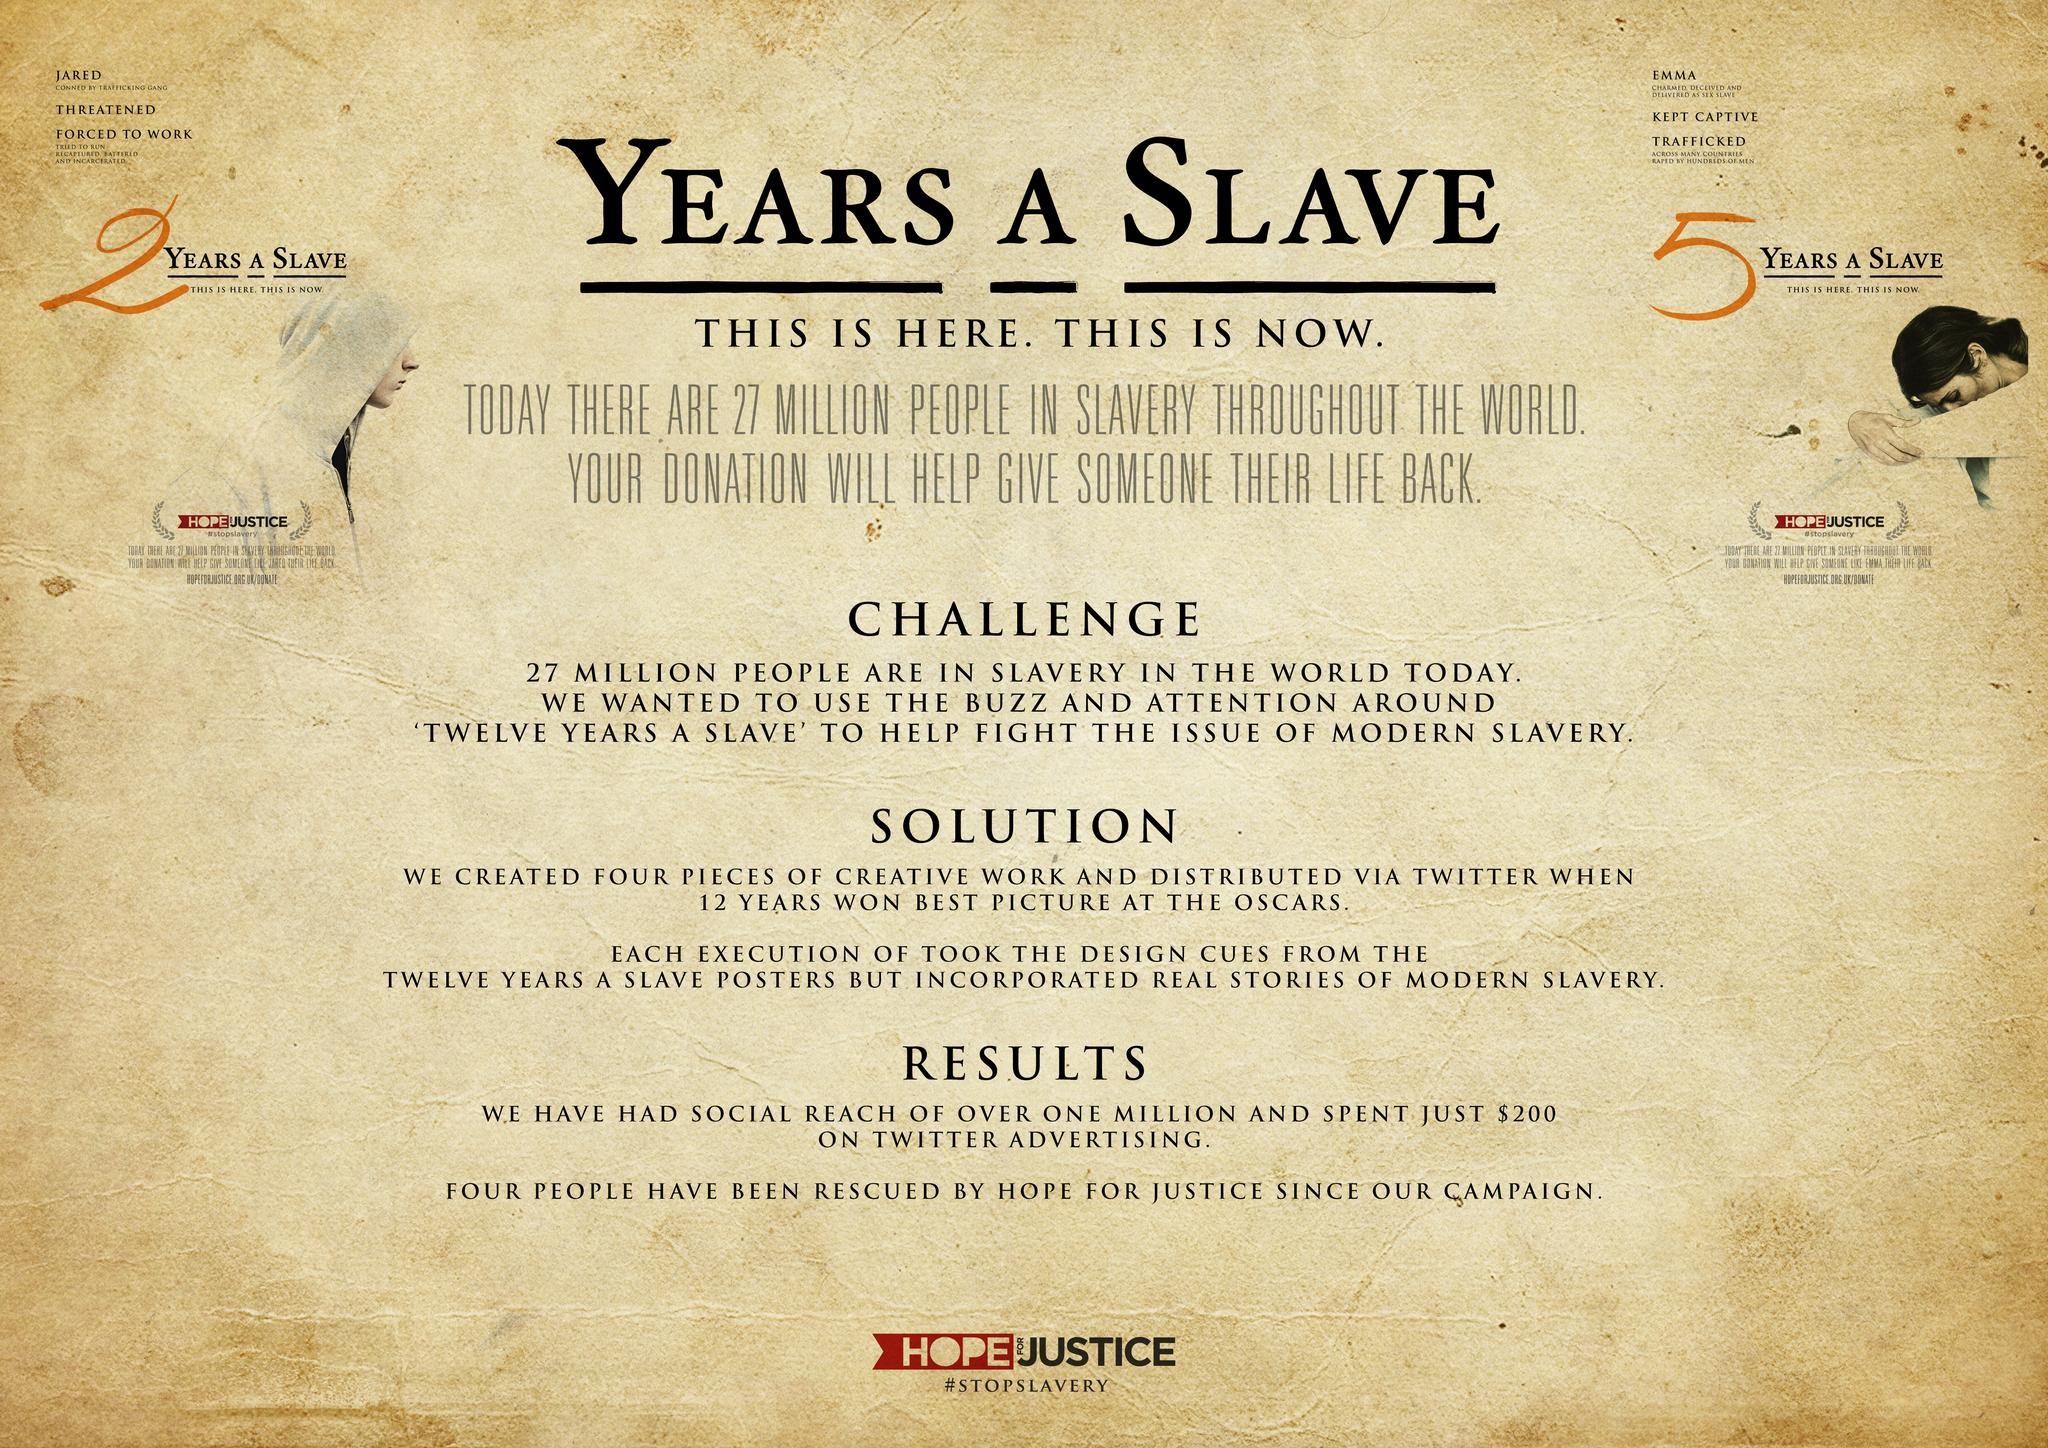 YEARS A SLAVE